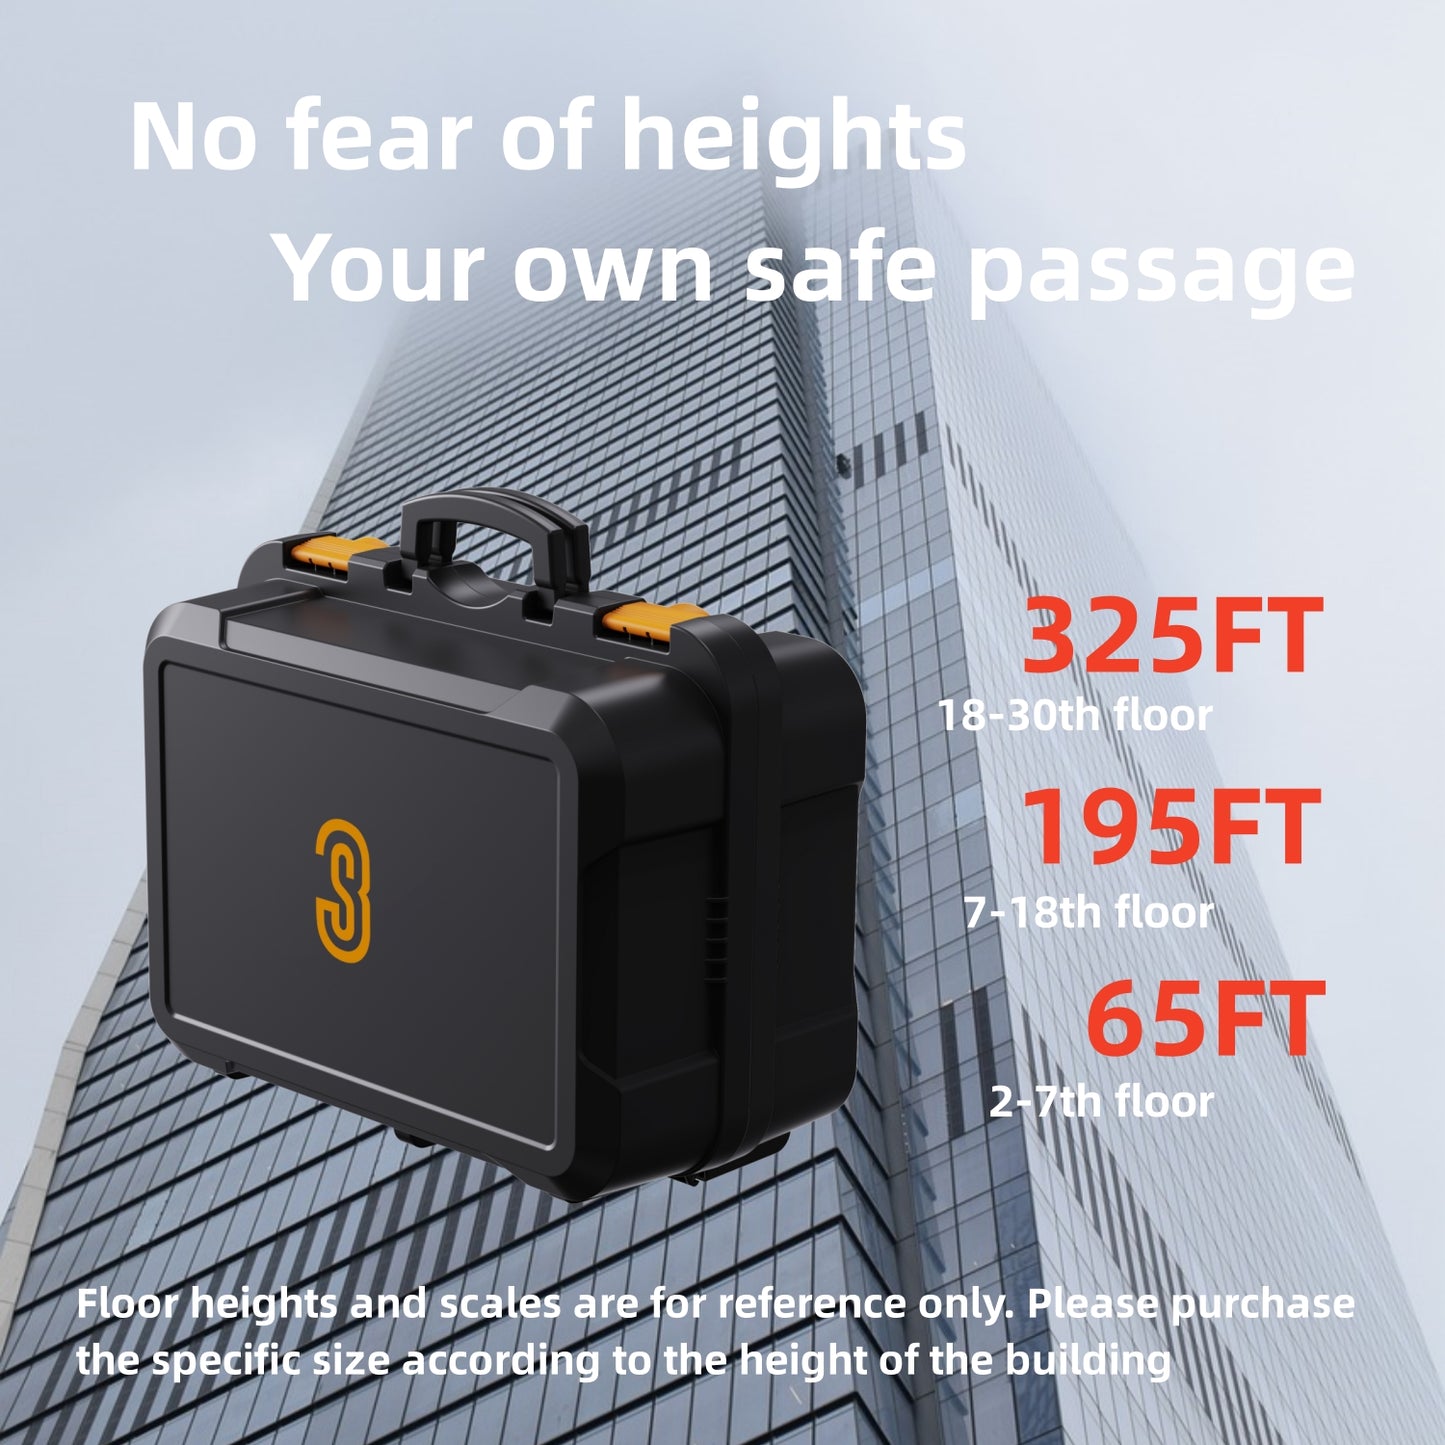 3S LIFT Rescue Unit, Evacuation and Rescue Unit, Suitable for 2-4 people to escape in case of a fire in the whole family, Medium and high-rise living in the home must have 195FT